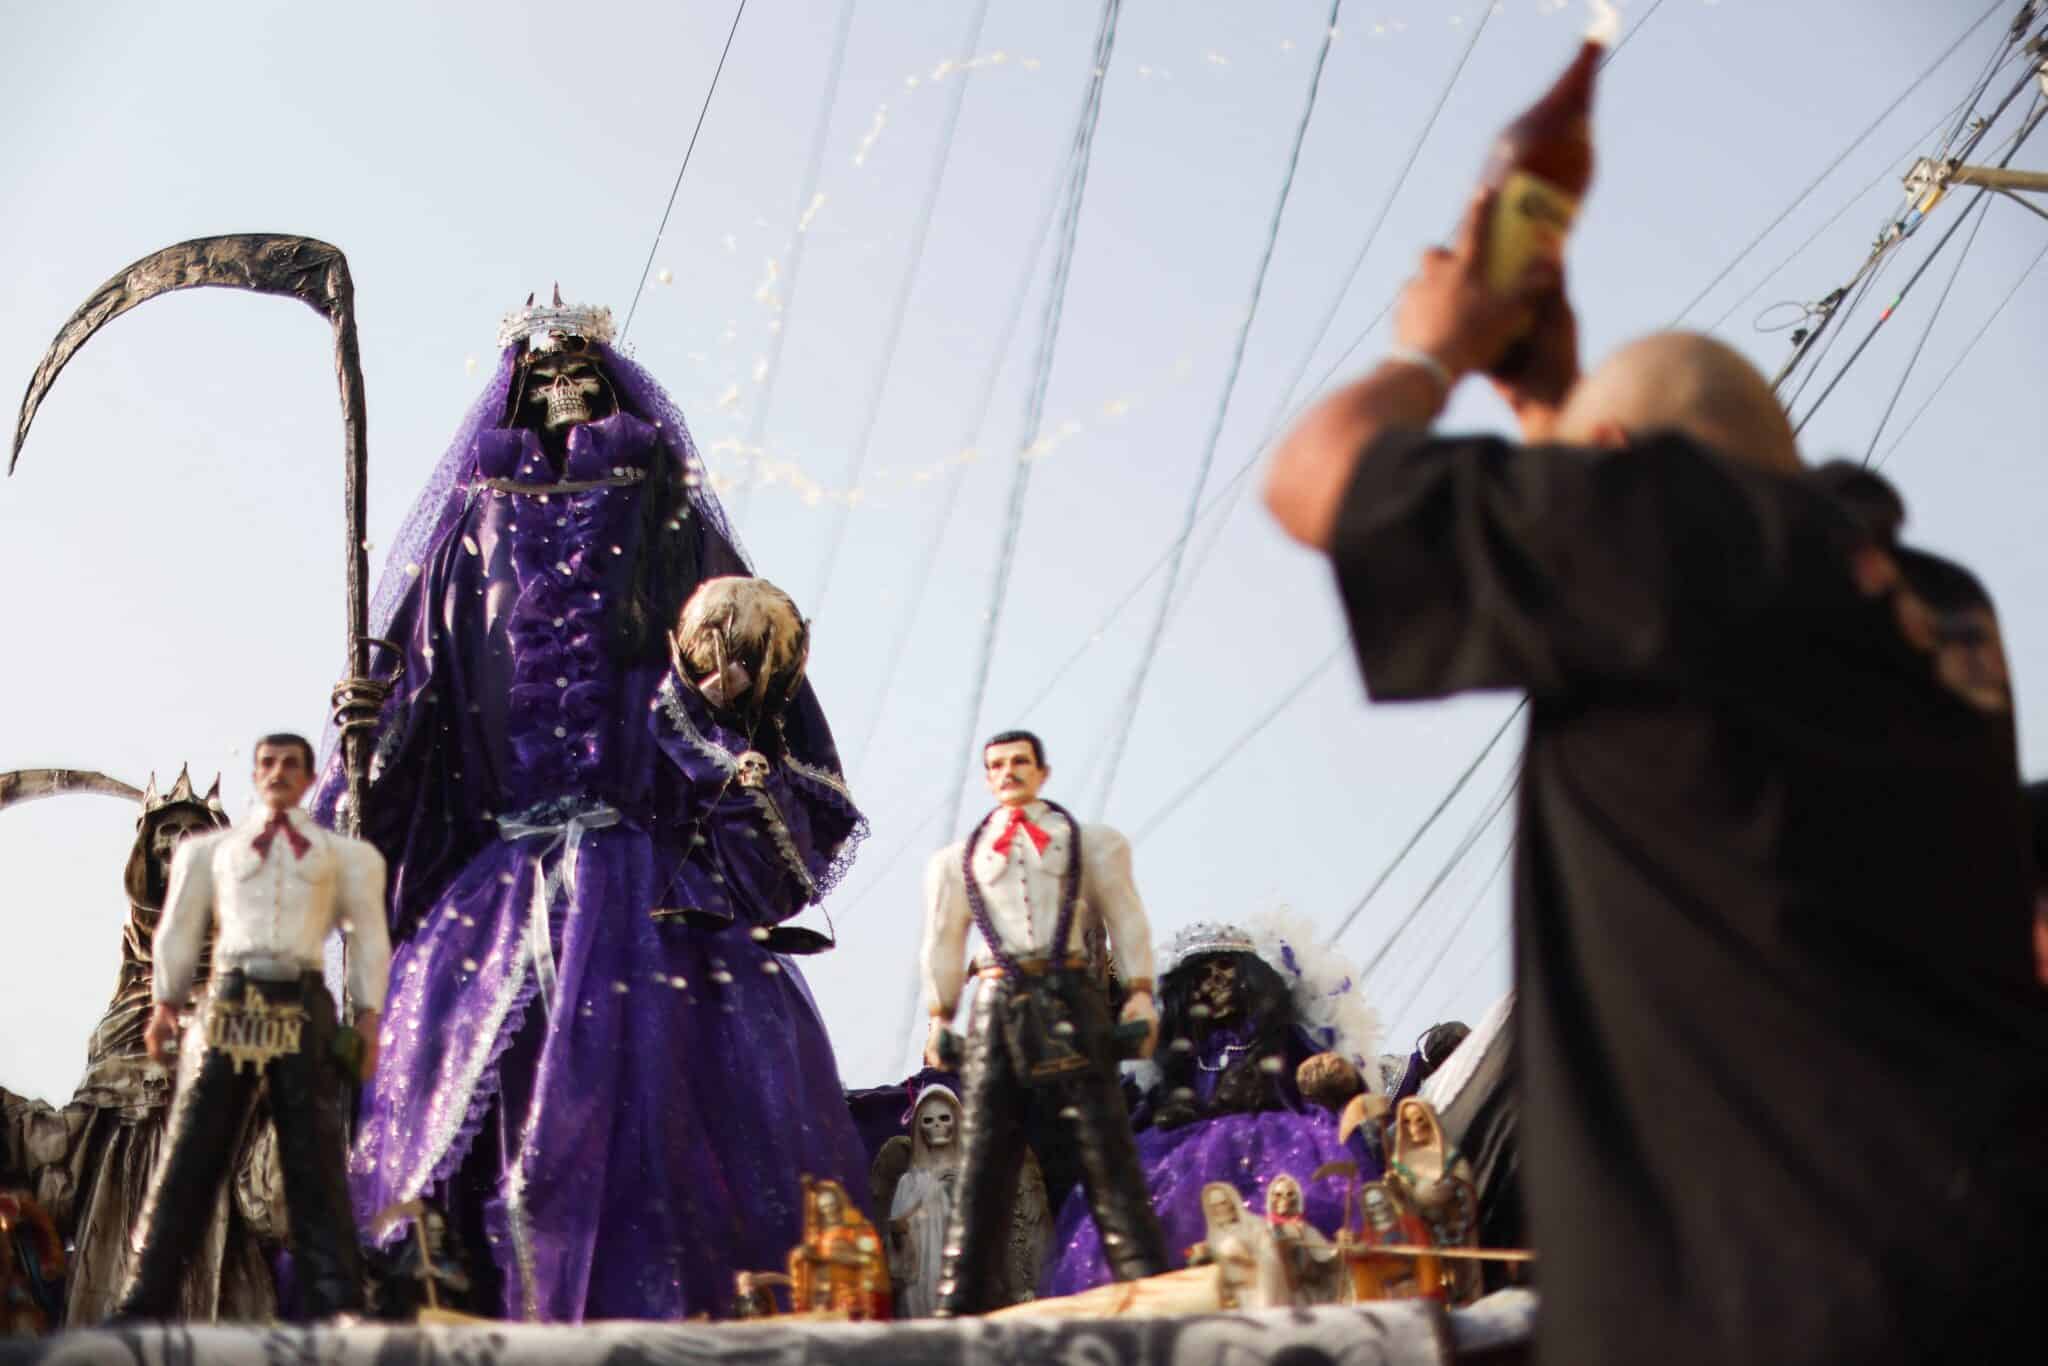 Jorge Granados, aka El Spanky, blesses Cristal, his image of La Santa Muerte, with beer Jan. 1, 2024, as he prepares for an annual pilgrimage from Ecatepec, Mexico, to the shrine of La Santa Muerte in Mexico City's Tepito neighborhood. Mexico's bishops criticized the use of an image of Santa Muerte, or St. Death, in political advertising during the presidential campaigns. (OSV News photo/Gustavo Graf, Reuters)